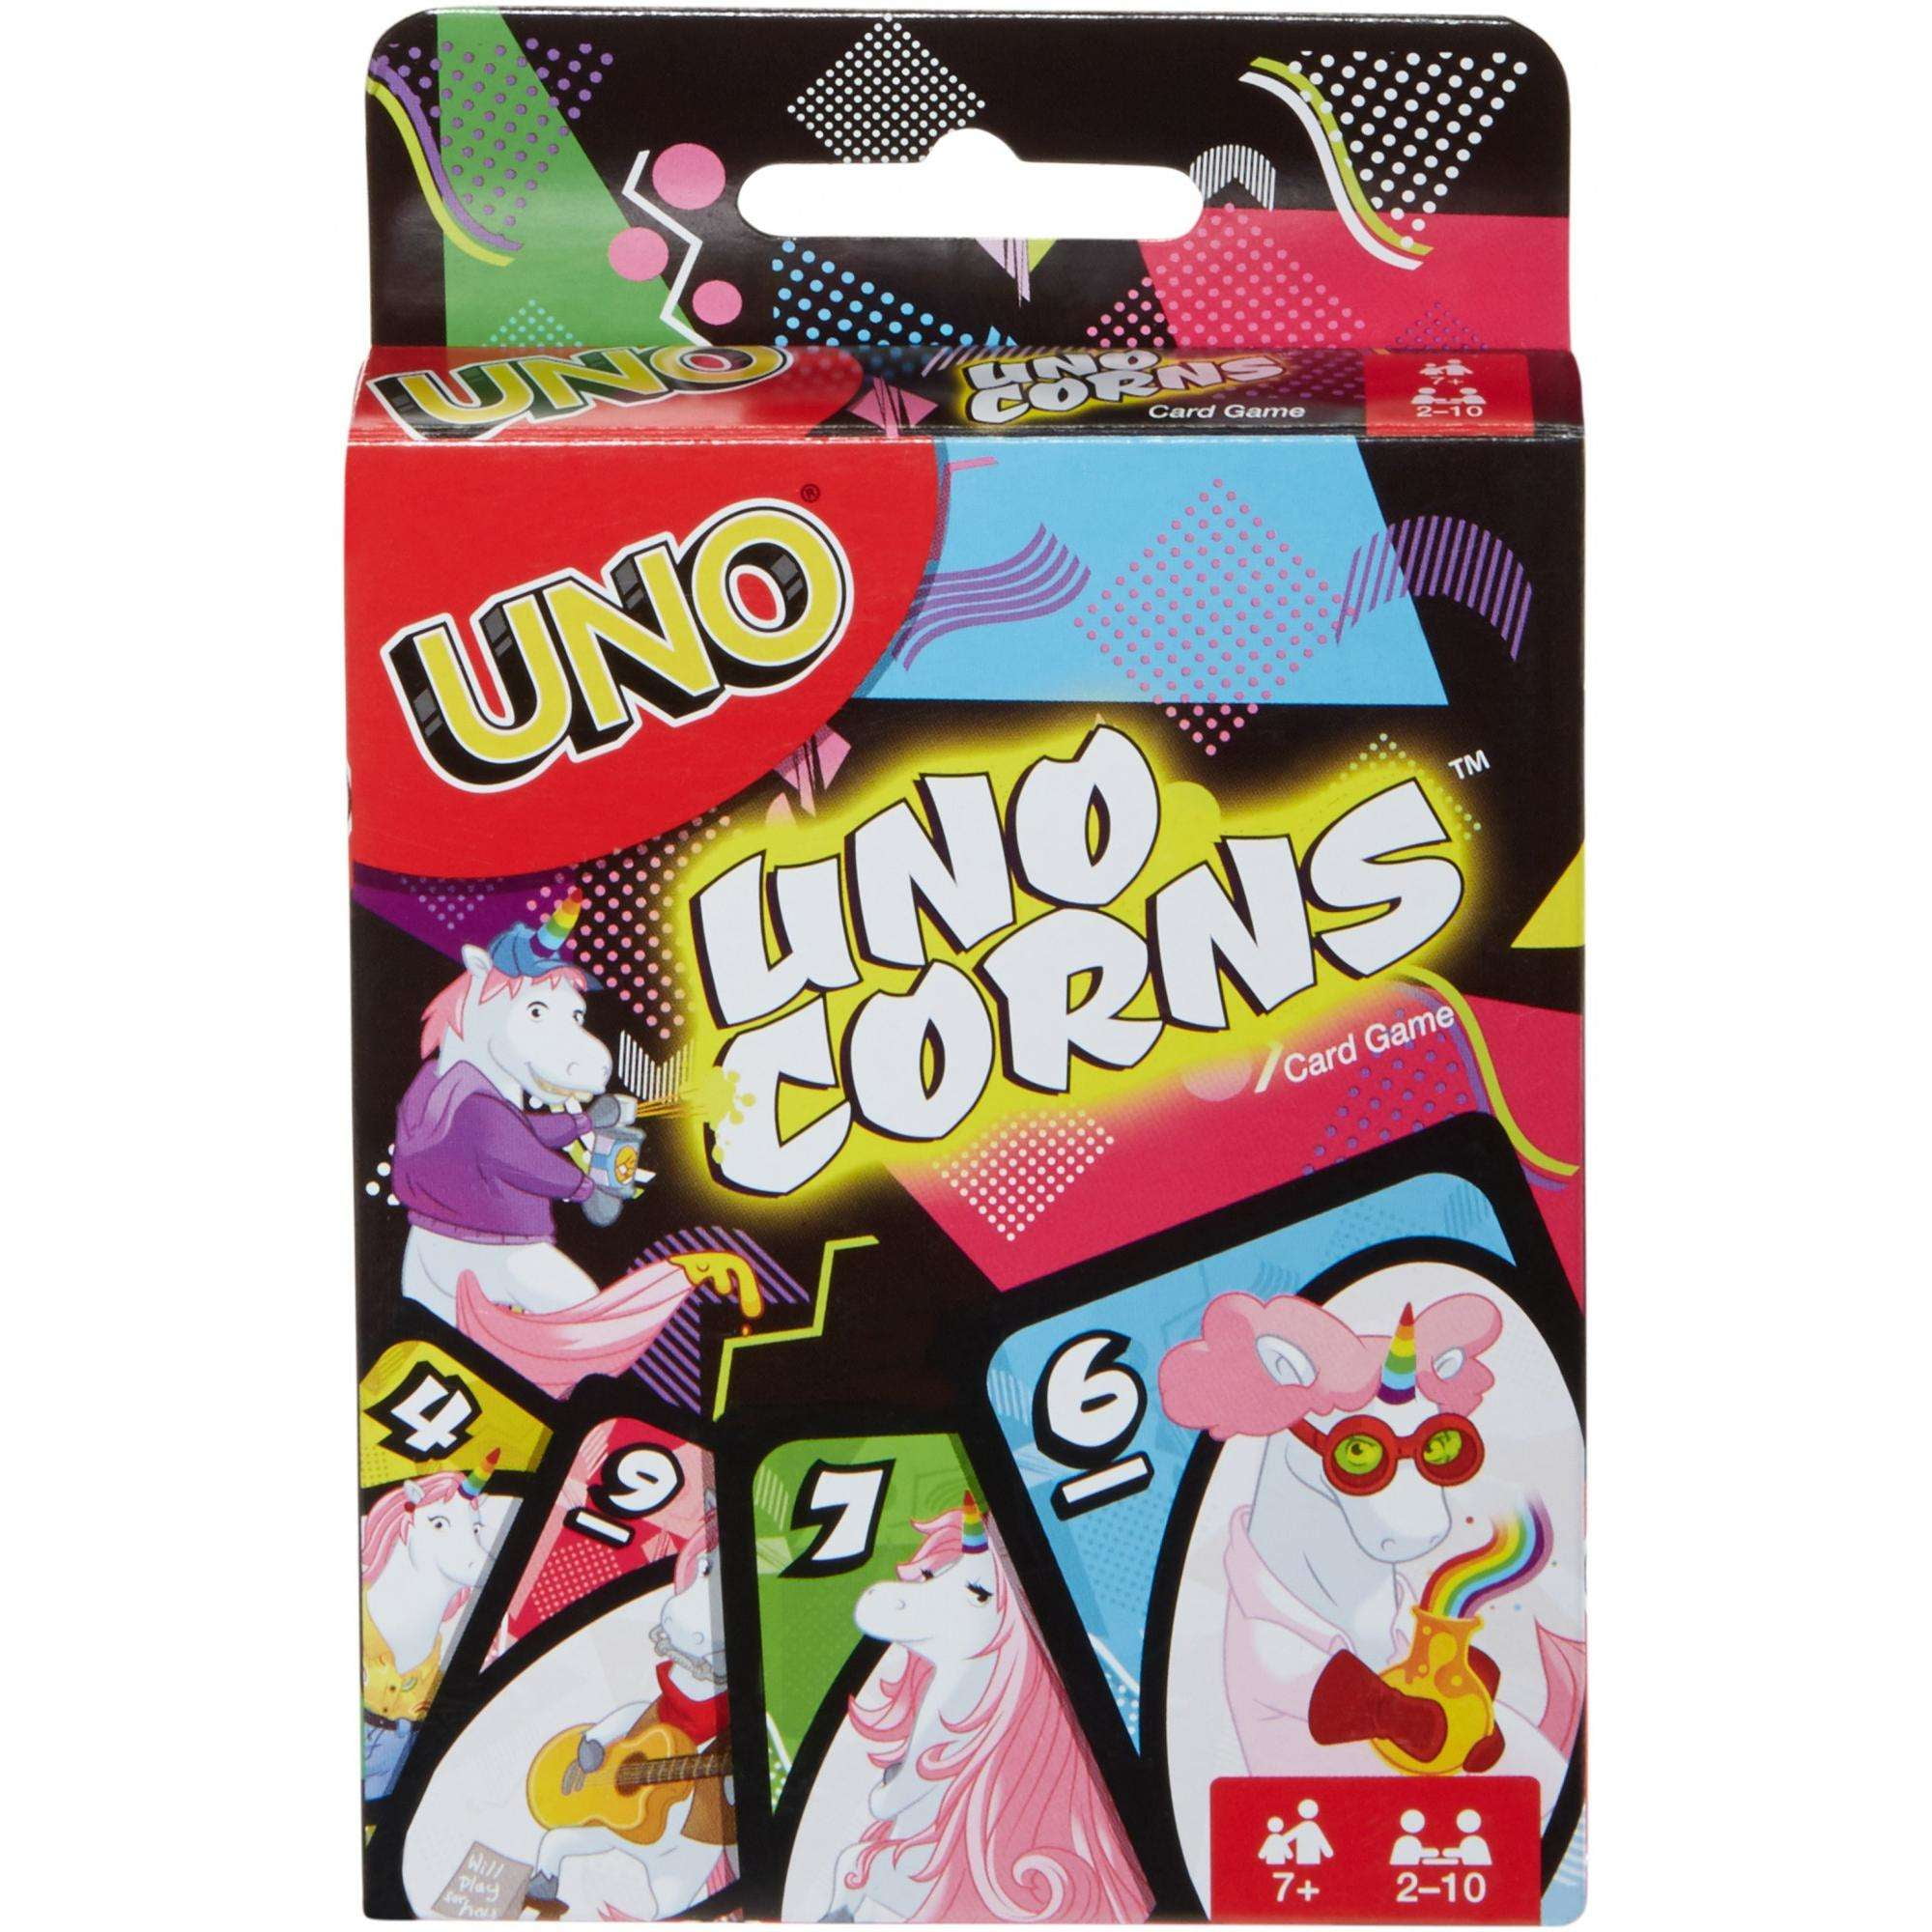 UNO UNOcorns Matching Card Game for 2-10 Players Ages 7Y+